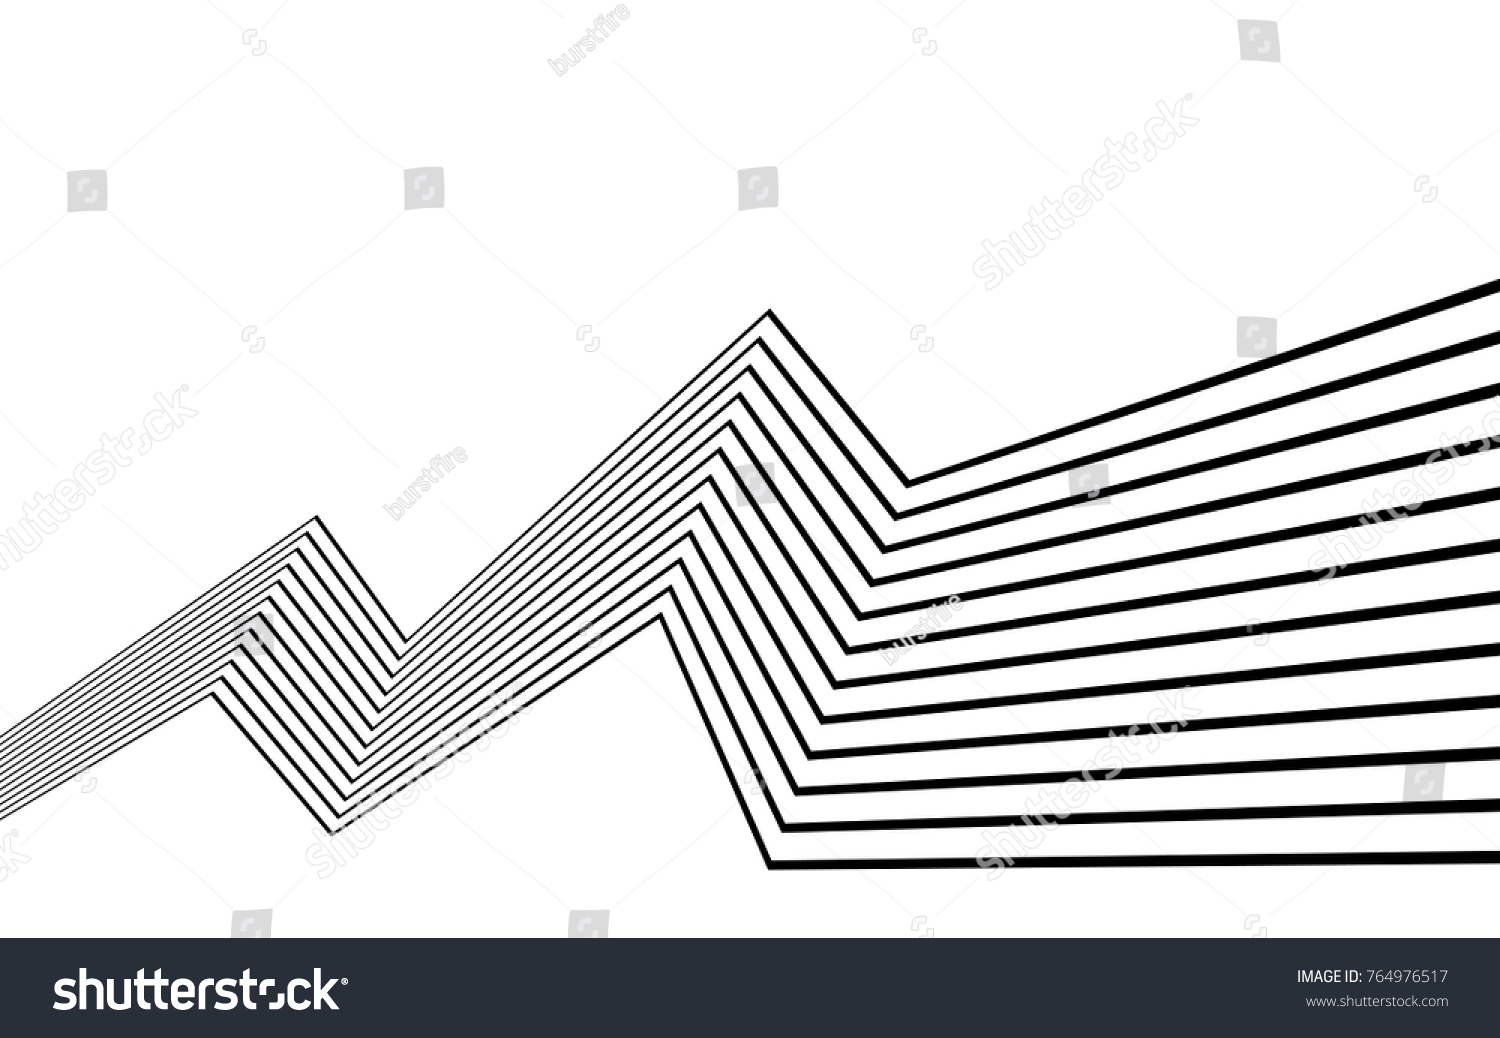 Black White Stripe Line Abstract Graphic Stock Vector (Royalty Free ...